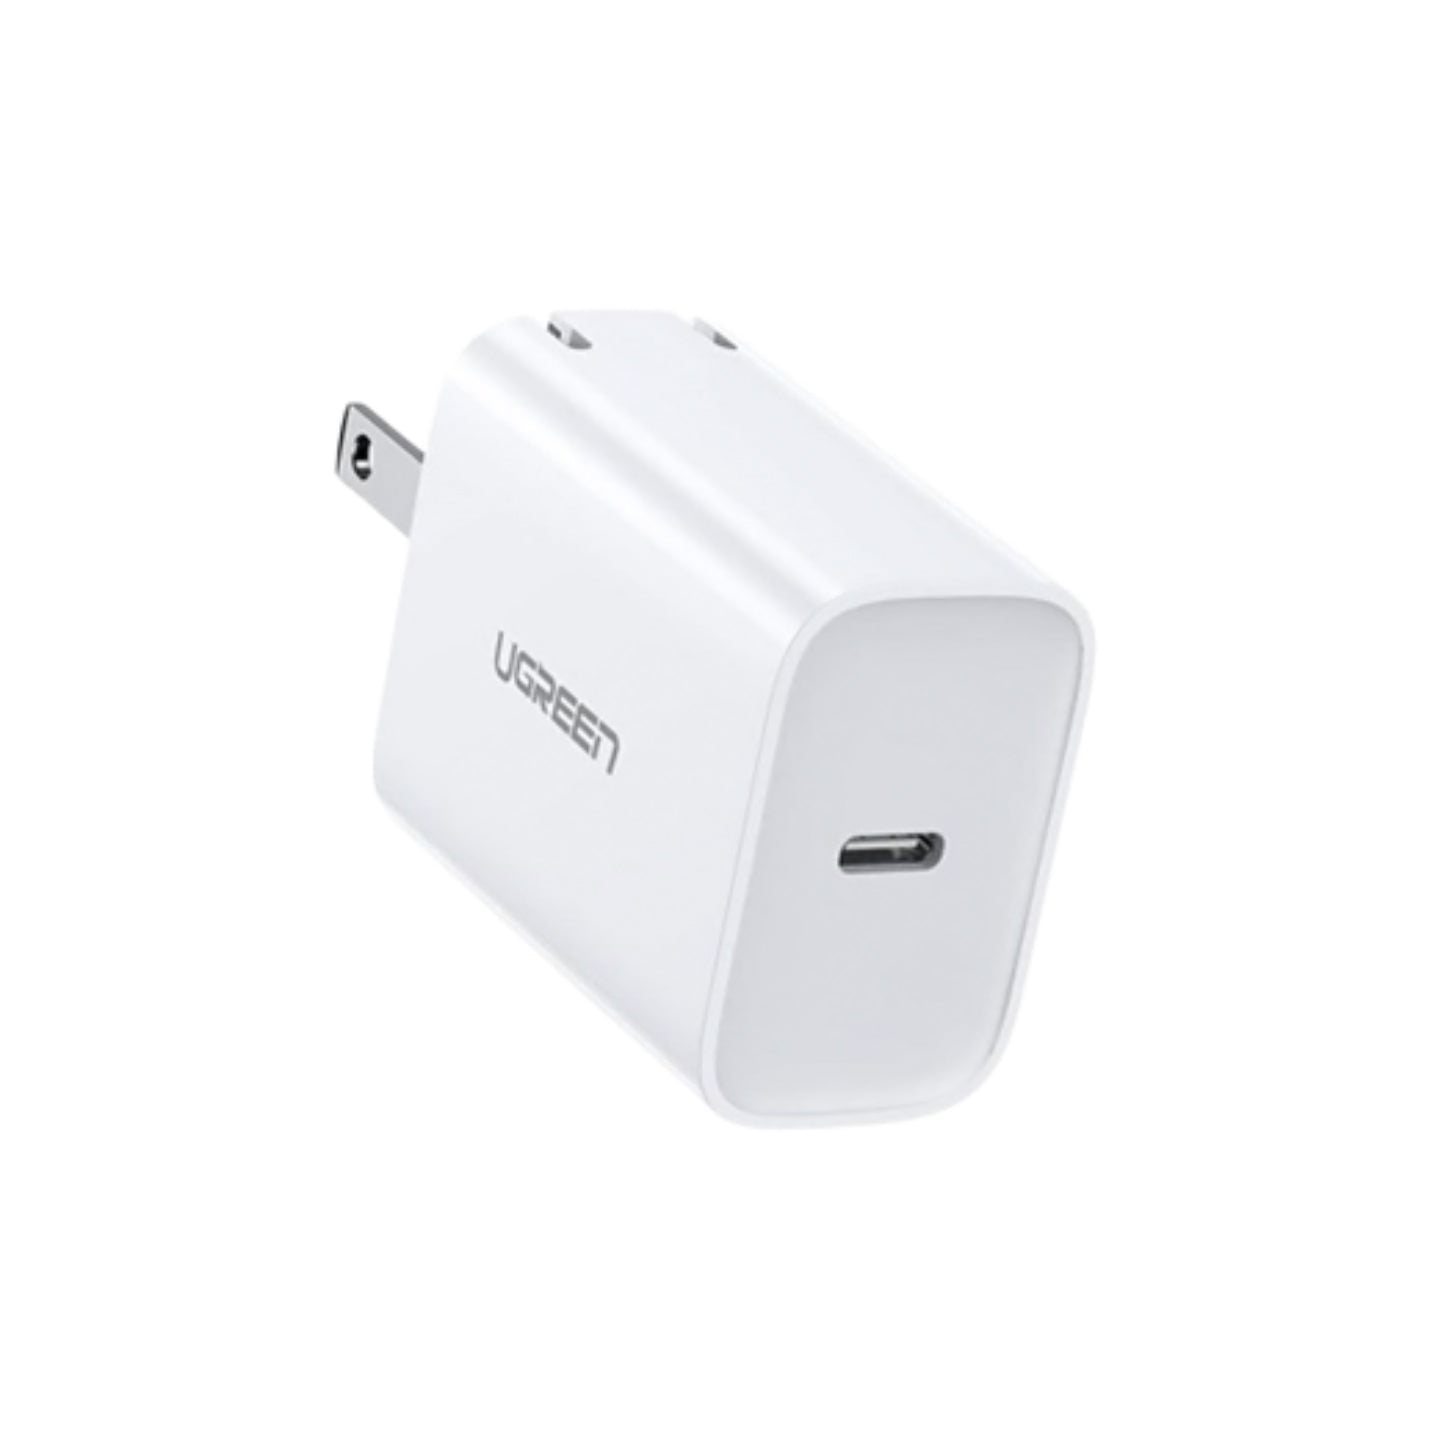 UGREEN PD USB Type-C Fast Charging Power Adapter Wall Charger for Smartphones and Tablets (20W, 30W) | 60449, 70149, 70226